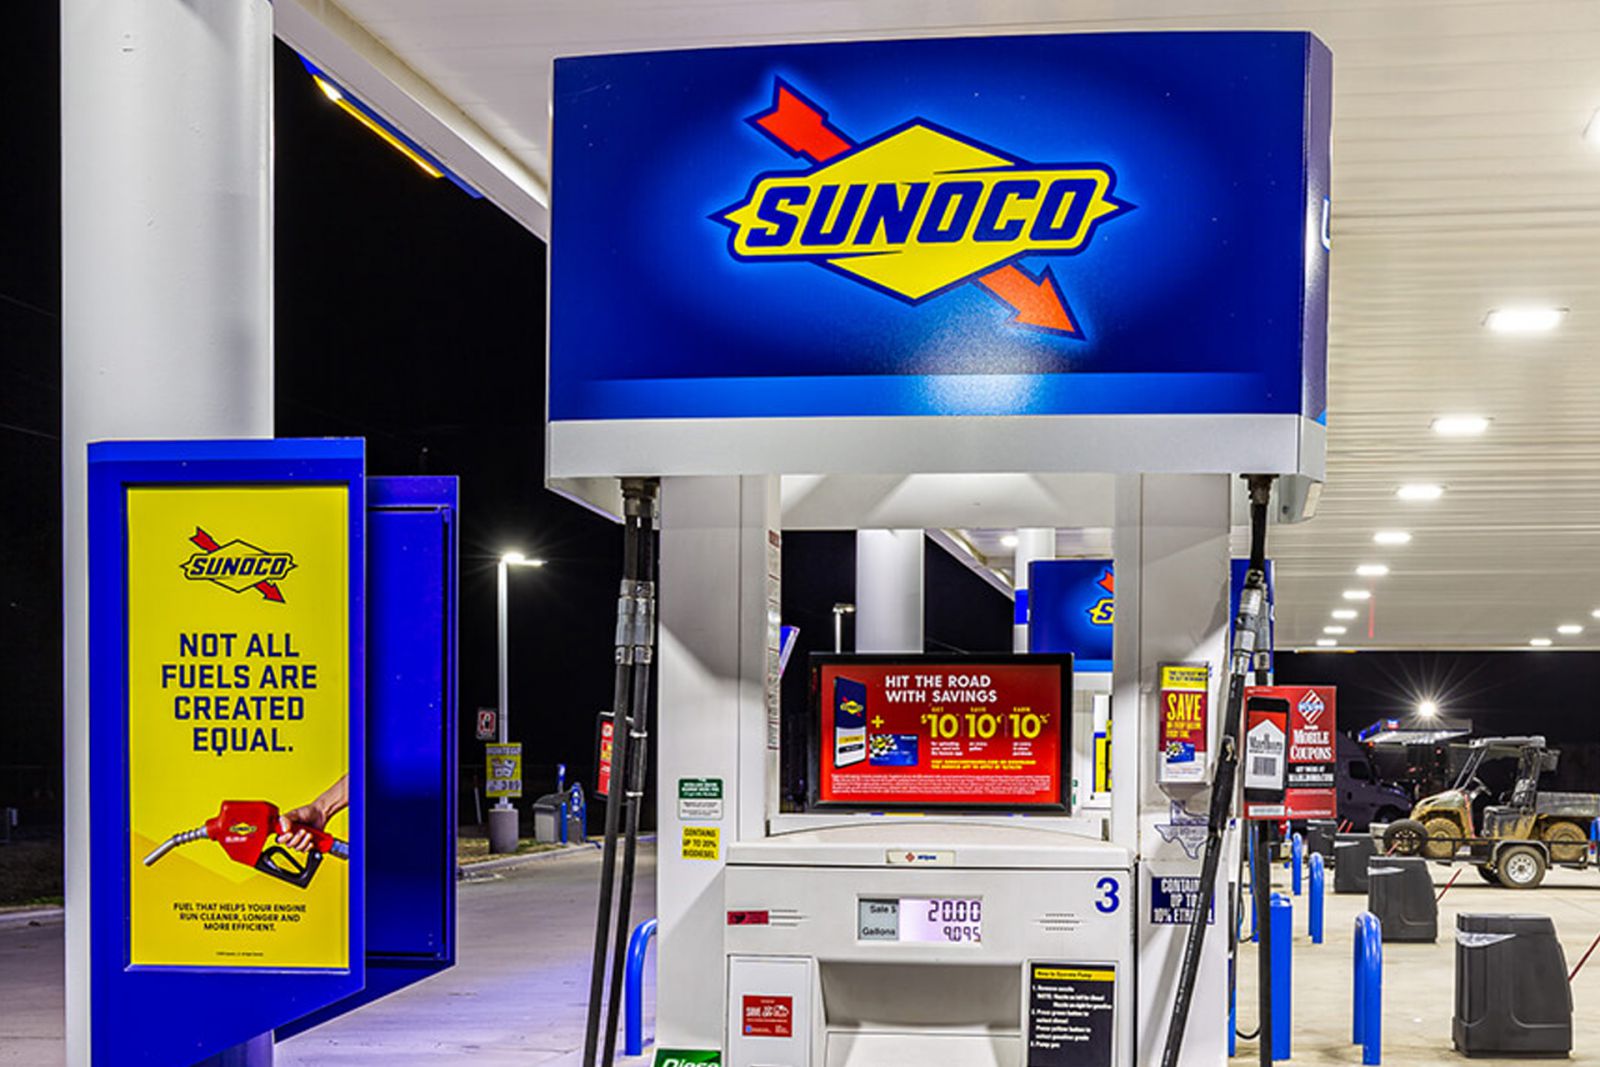 5 Reasons to Always Use Top Tier Fuel Sunoco